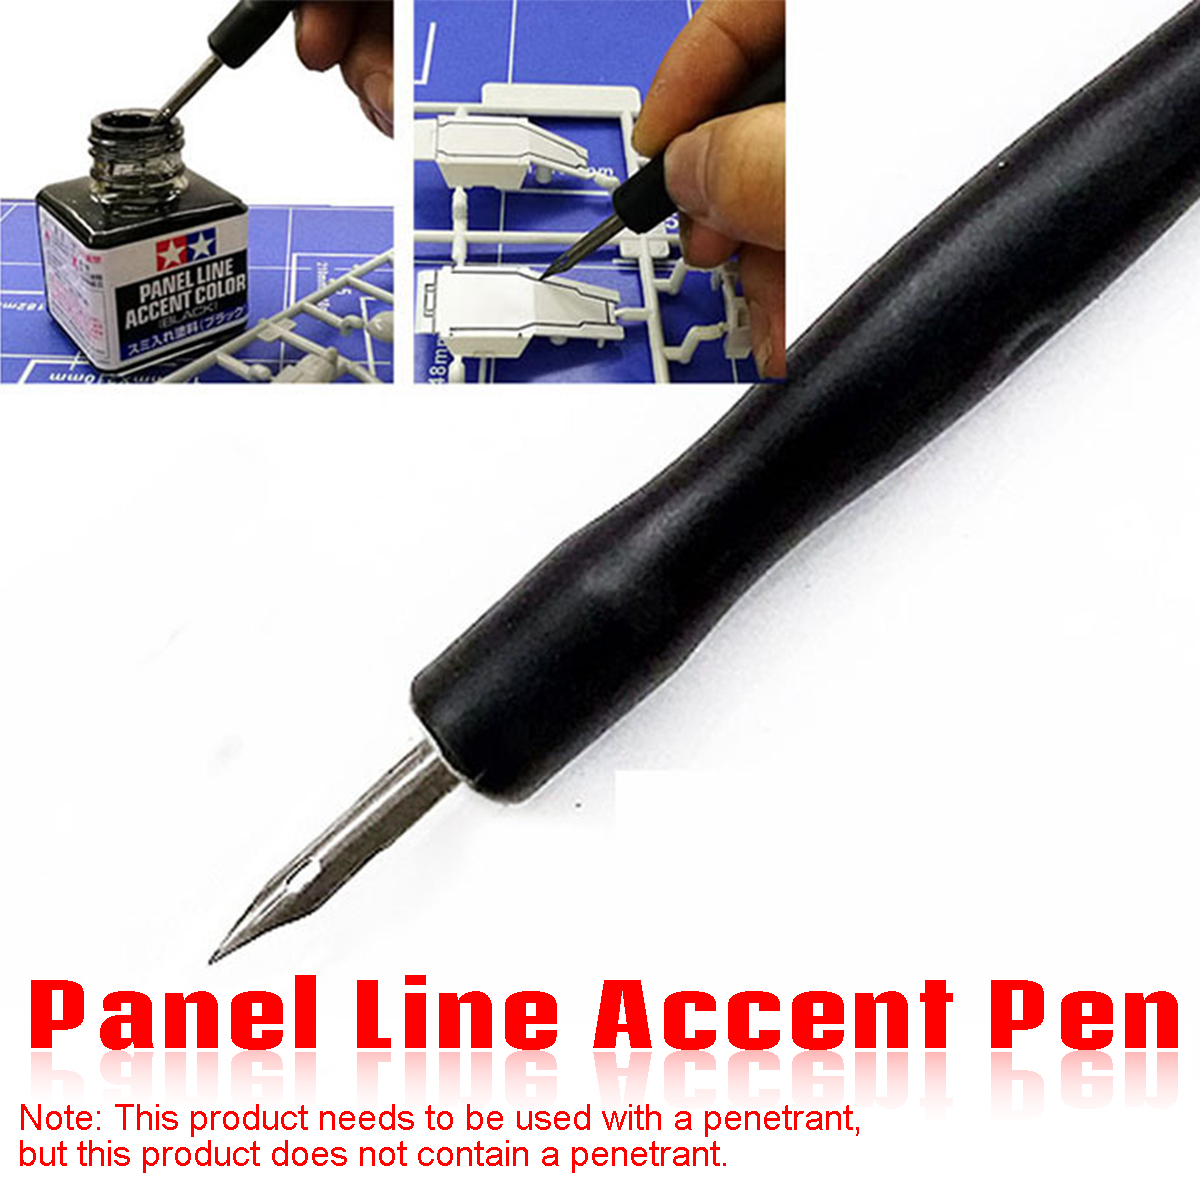 Model-Panel-Line-Accent-Pen-Assembly-Model-Building-Accessories-Scrubbing-Infiltration-1644203-1